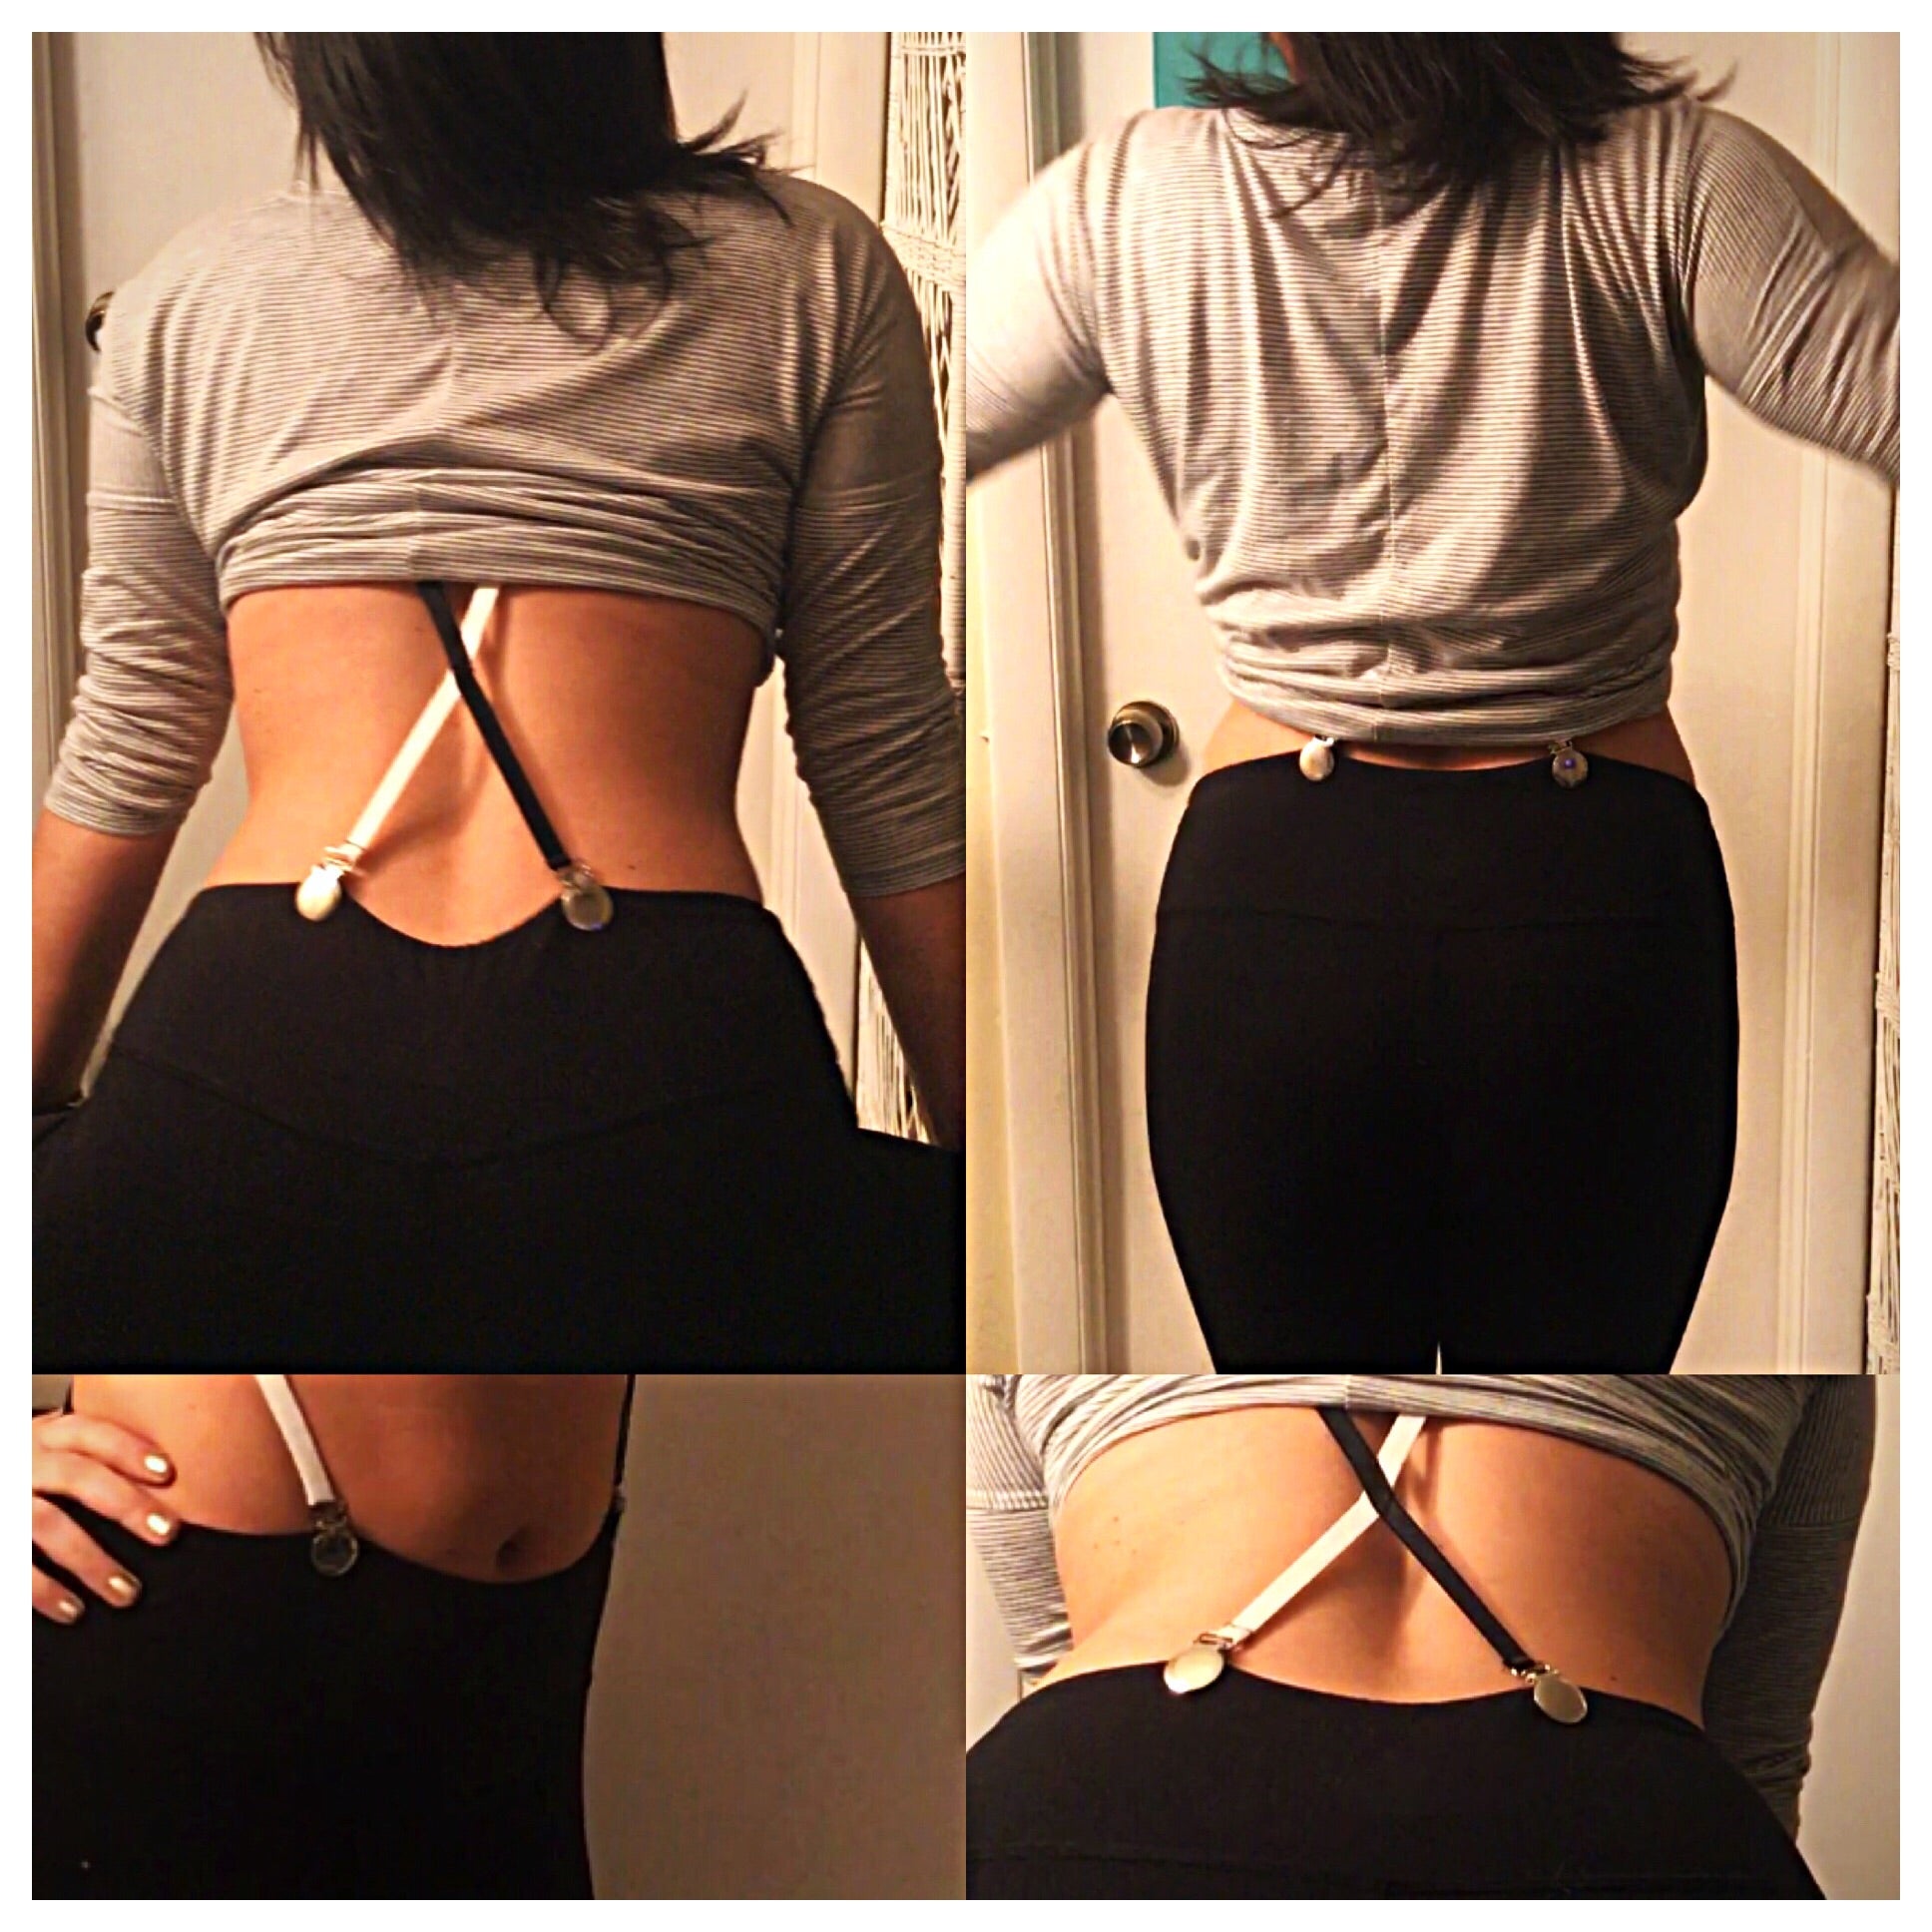 Women's Undergarment Suspenders, Y-back, Butt Lifting, Smoothing